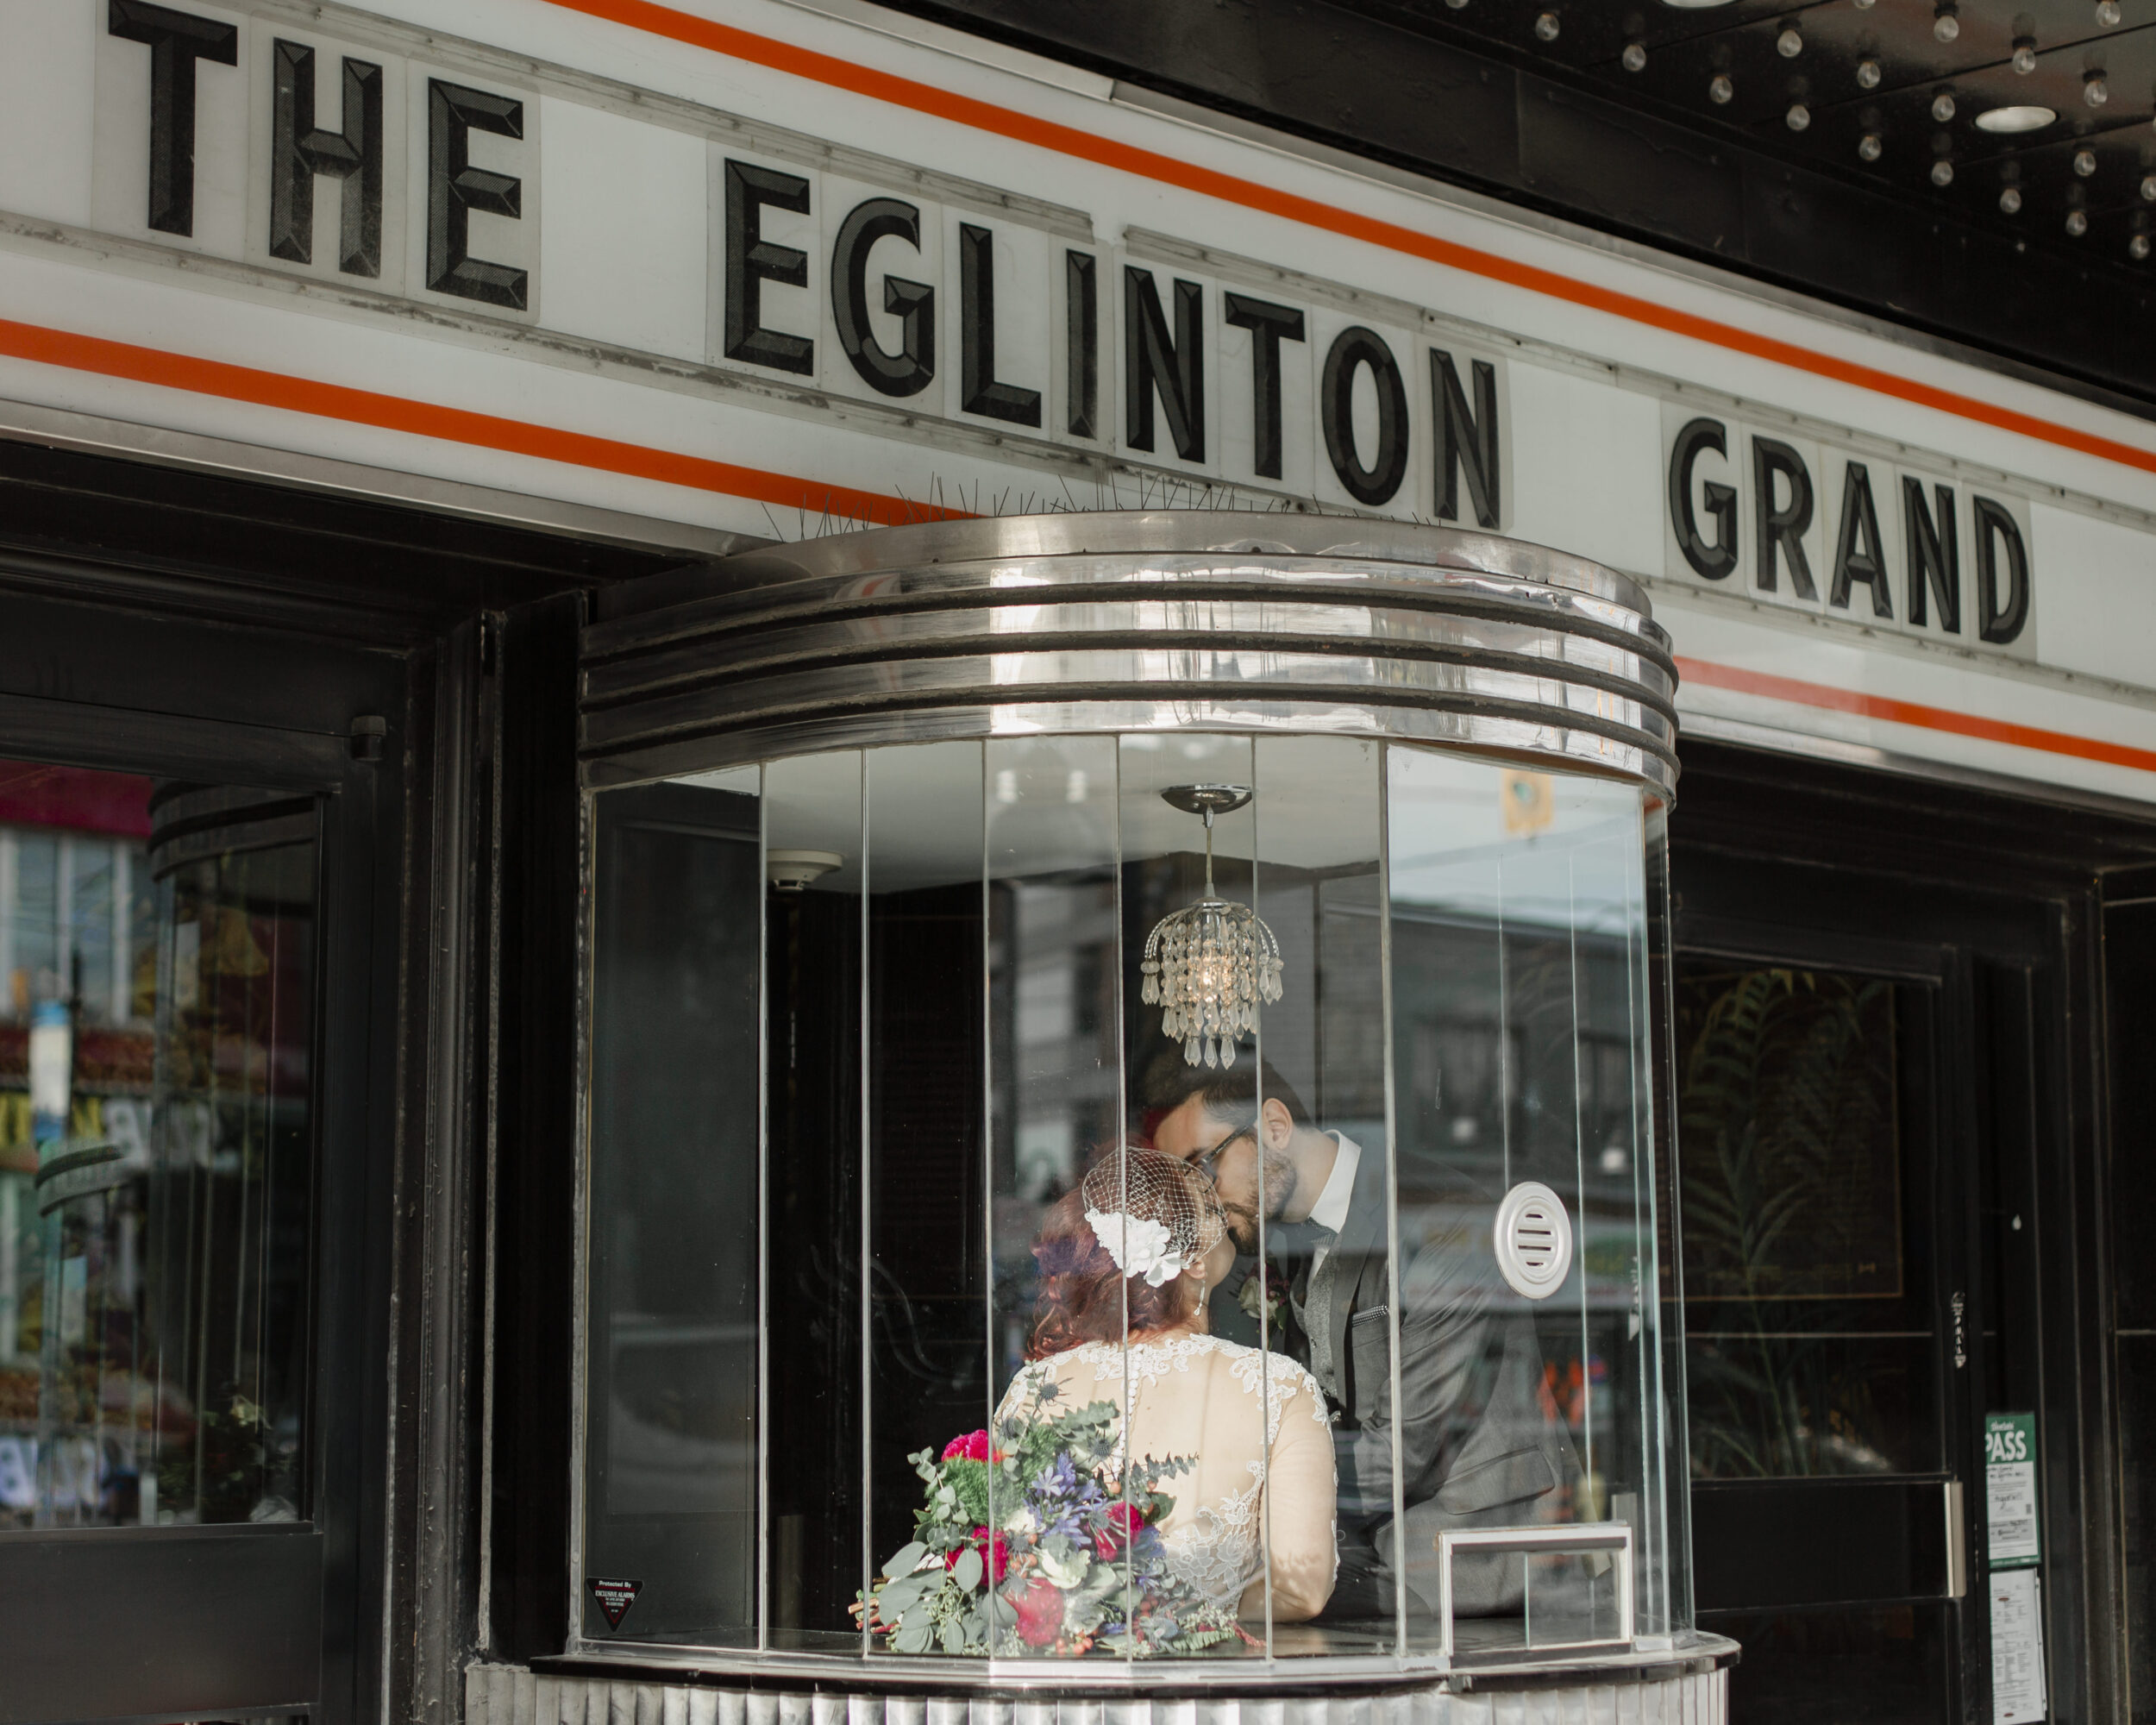 A couple gets married at the Eglinton Grand in Toronto.